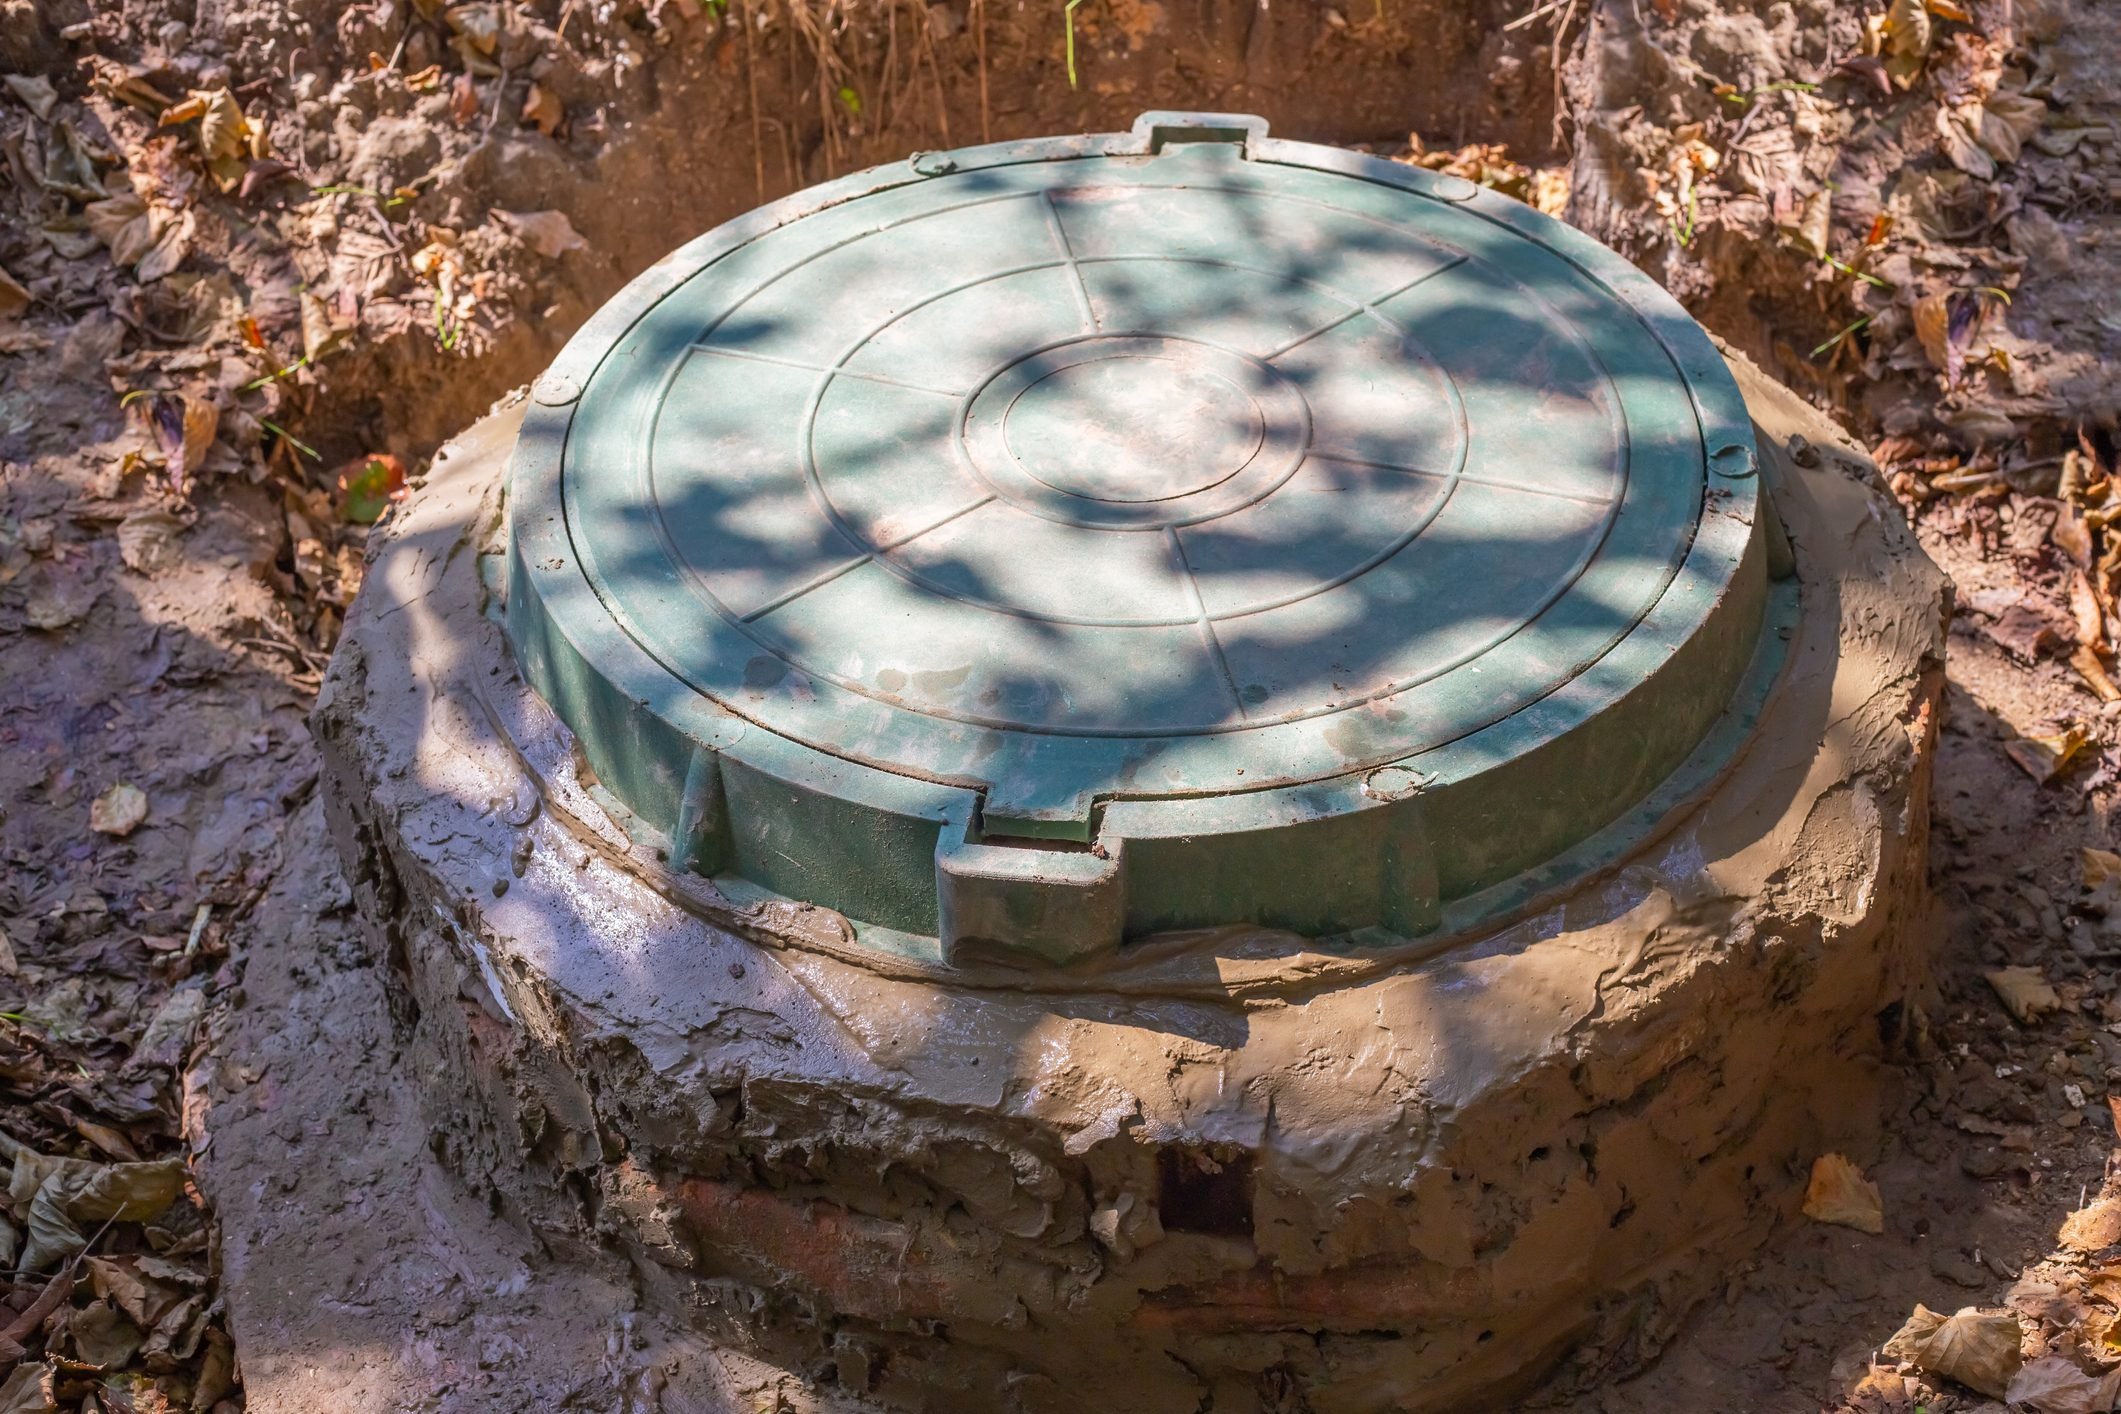 Should You Get a Septic Tank for the Cabin?